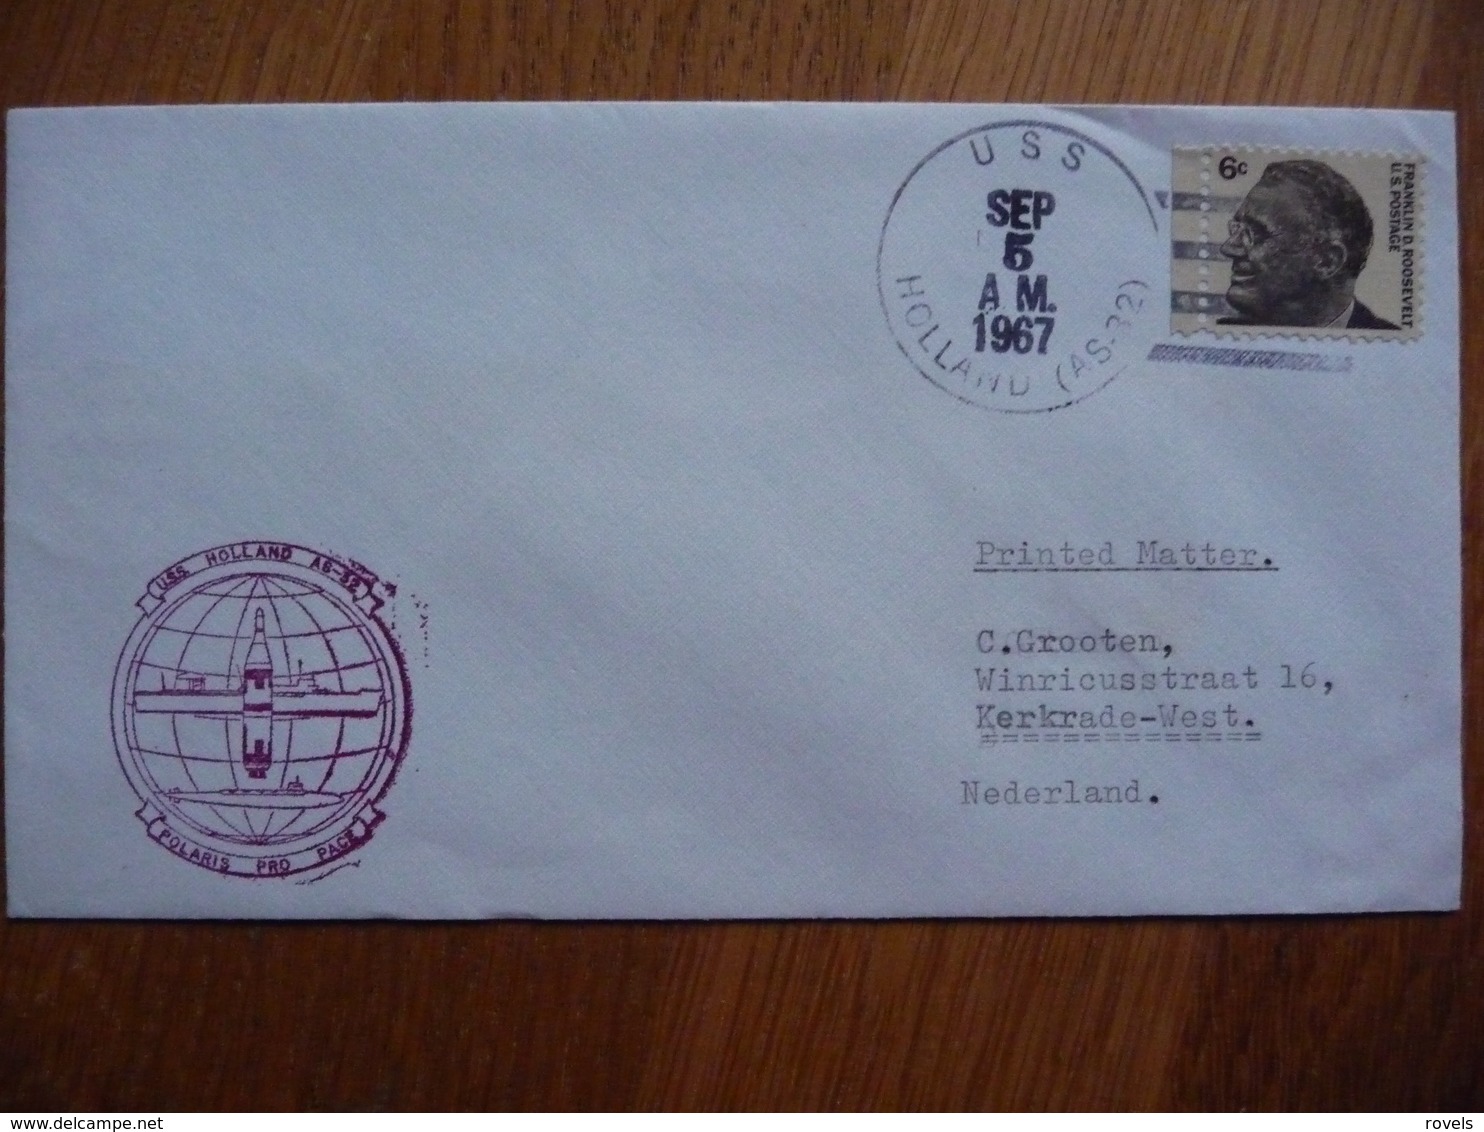 (us) Schiffpost Shipmail HOLLAND AS-32 POLARIS PRO PAGE 1967 UNITED STATES. - Bateaux